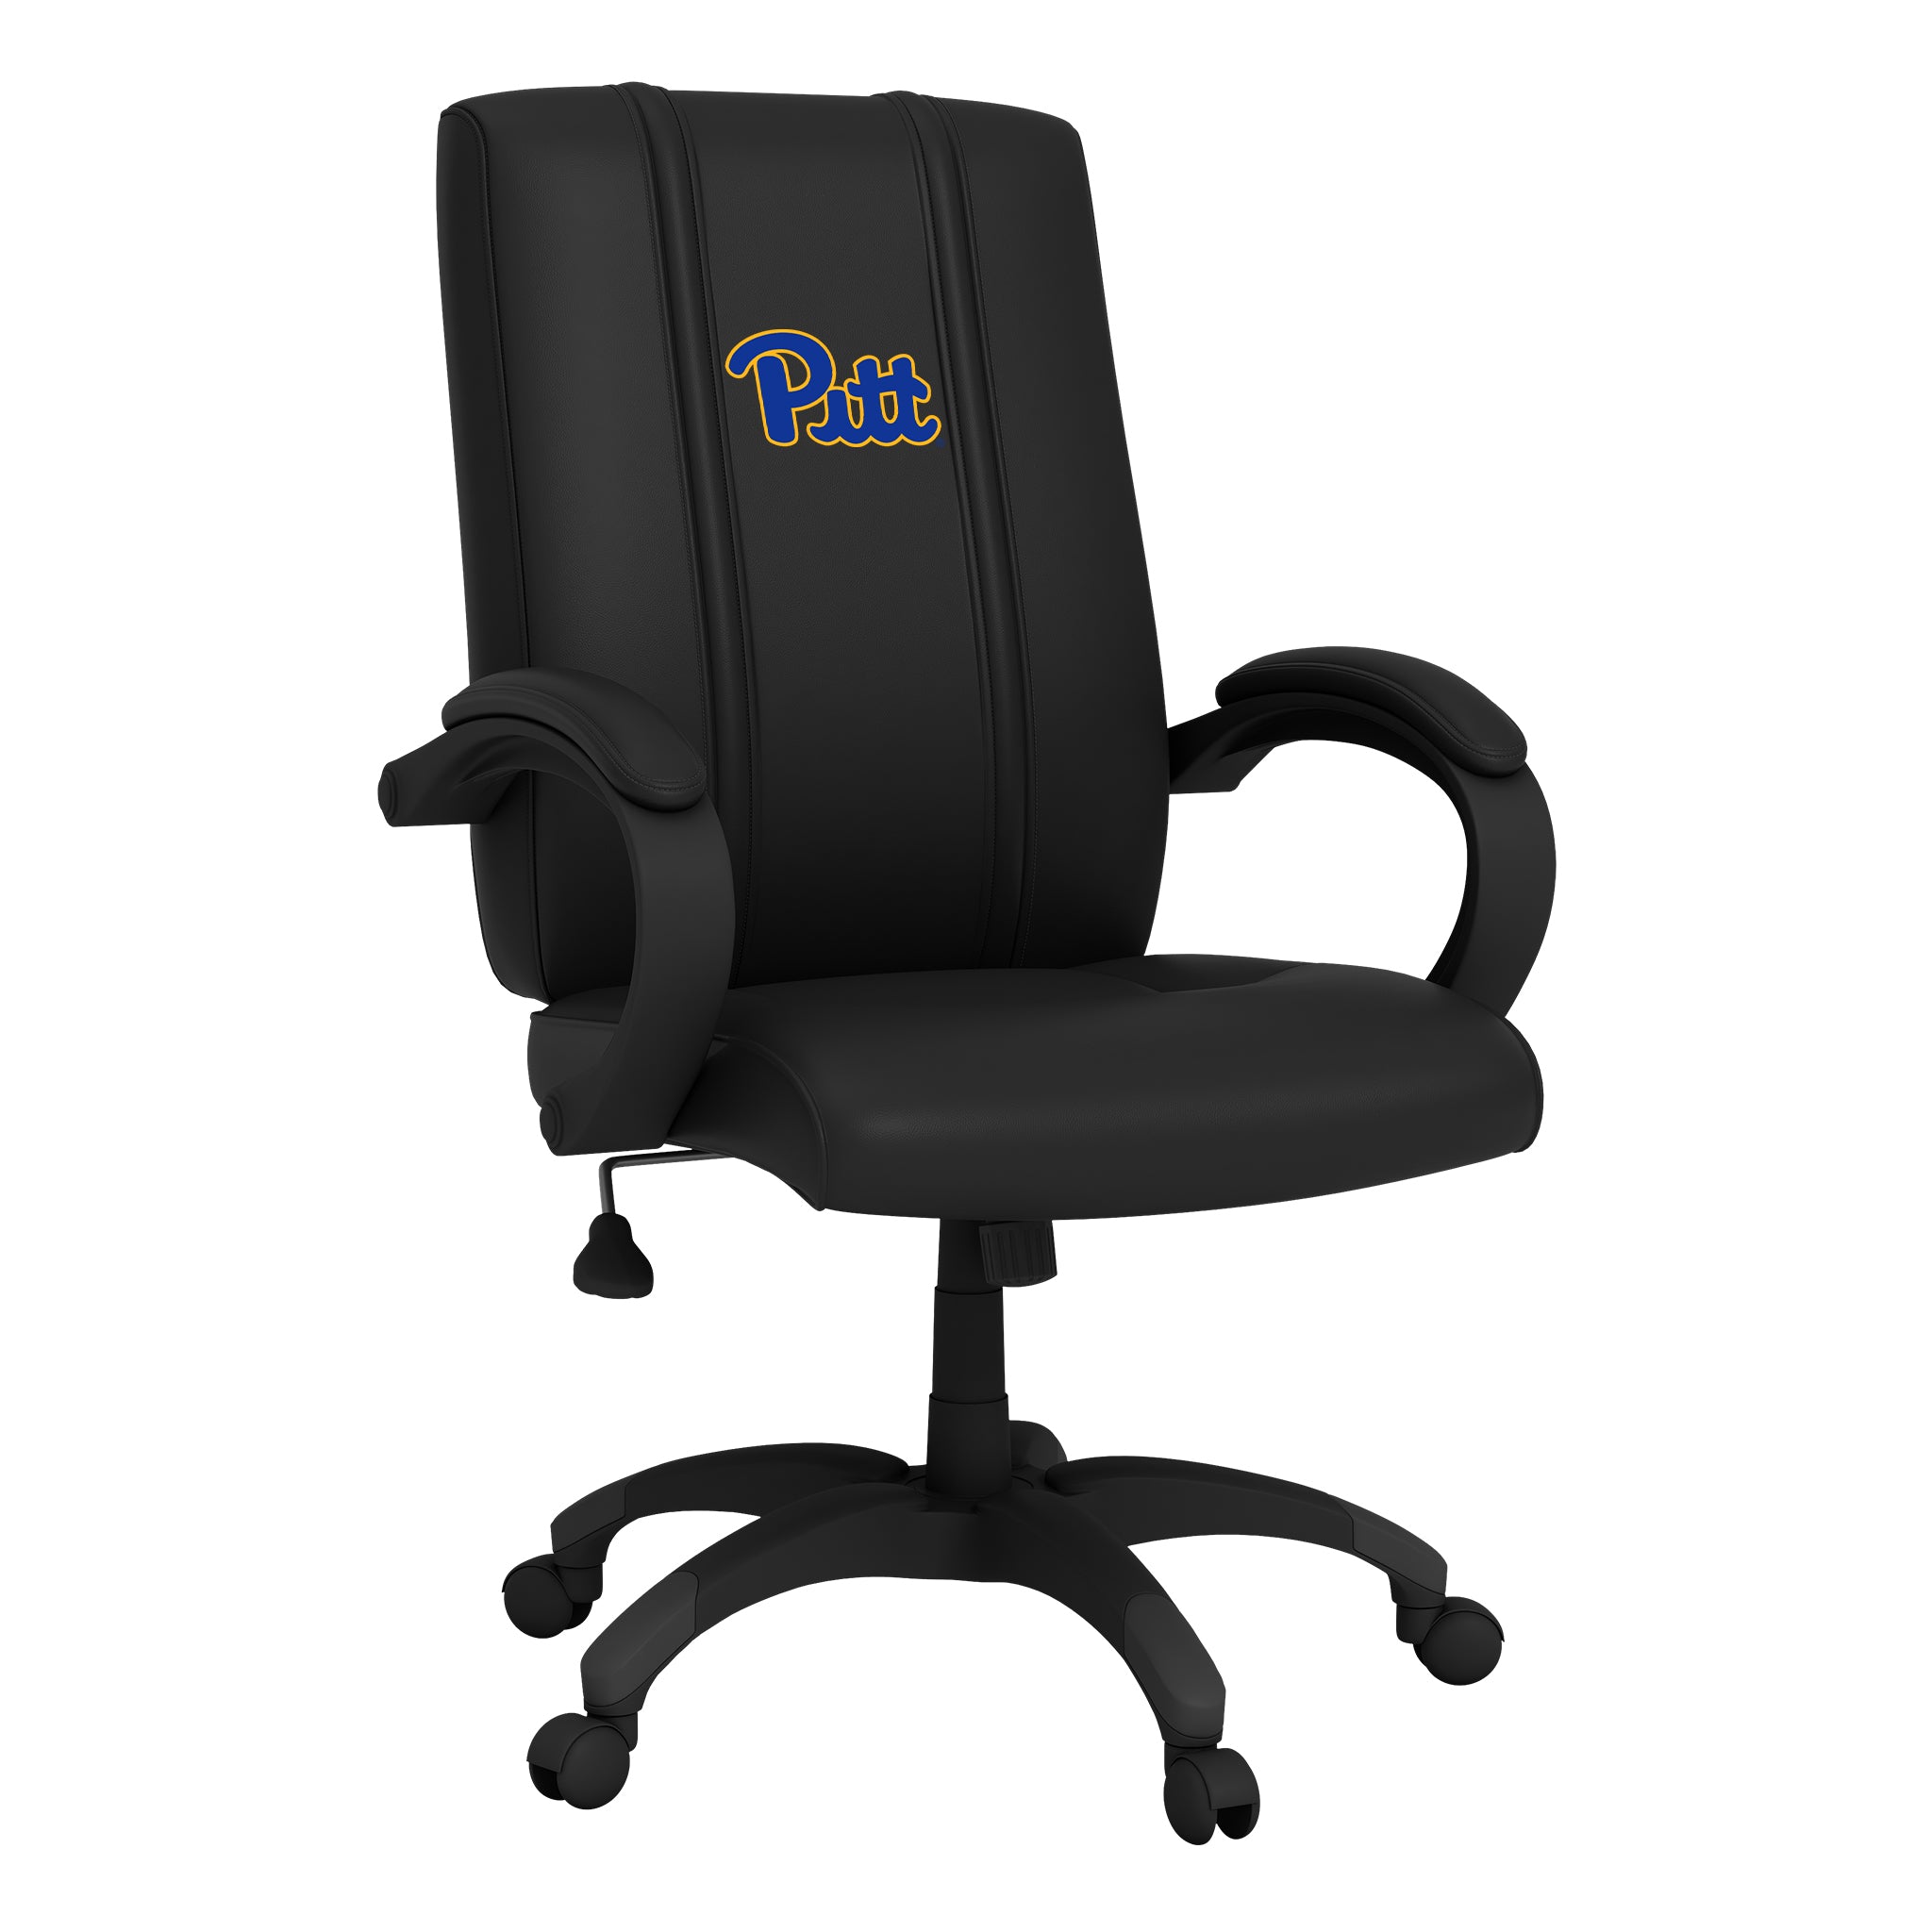 Pittsburgh Panthers Office Chair 1000 with Pittsburgh Panthers Logo